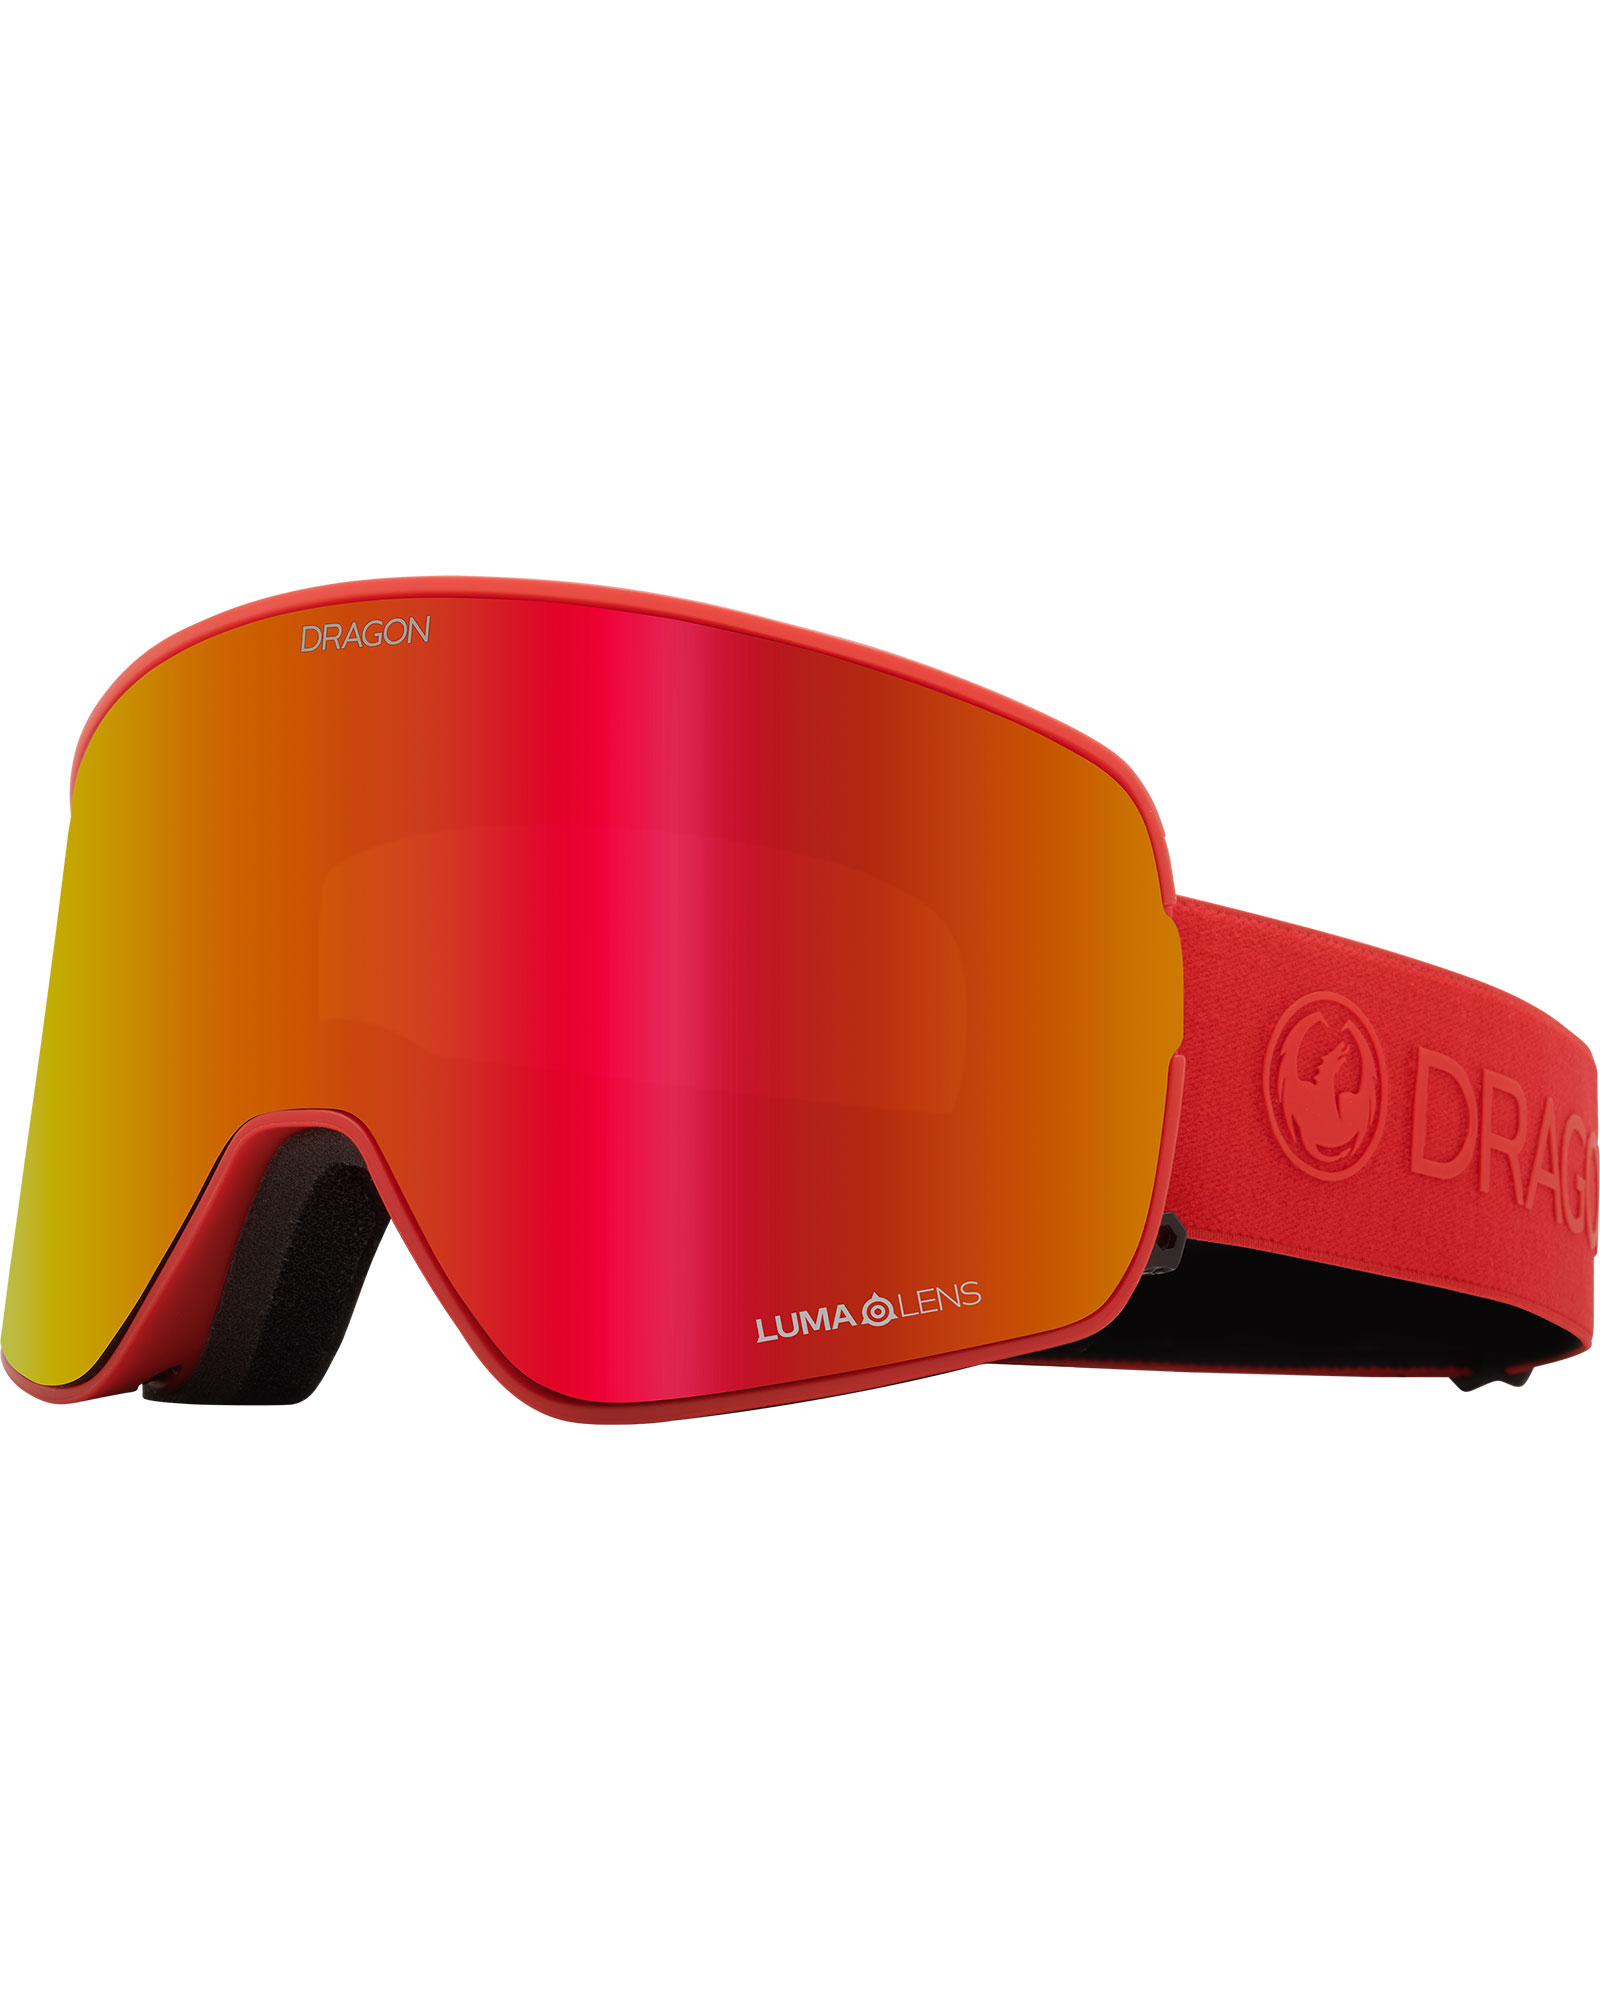 Product image of Dragon NFX2 Saffron / Lumalens Red Ionzed + Lumalens Rose Goggles